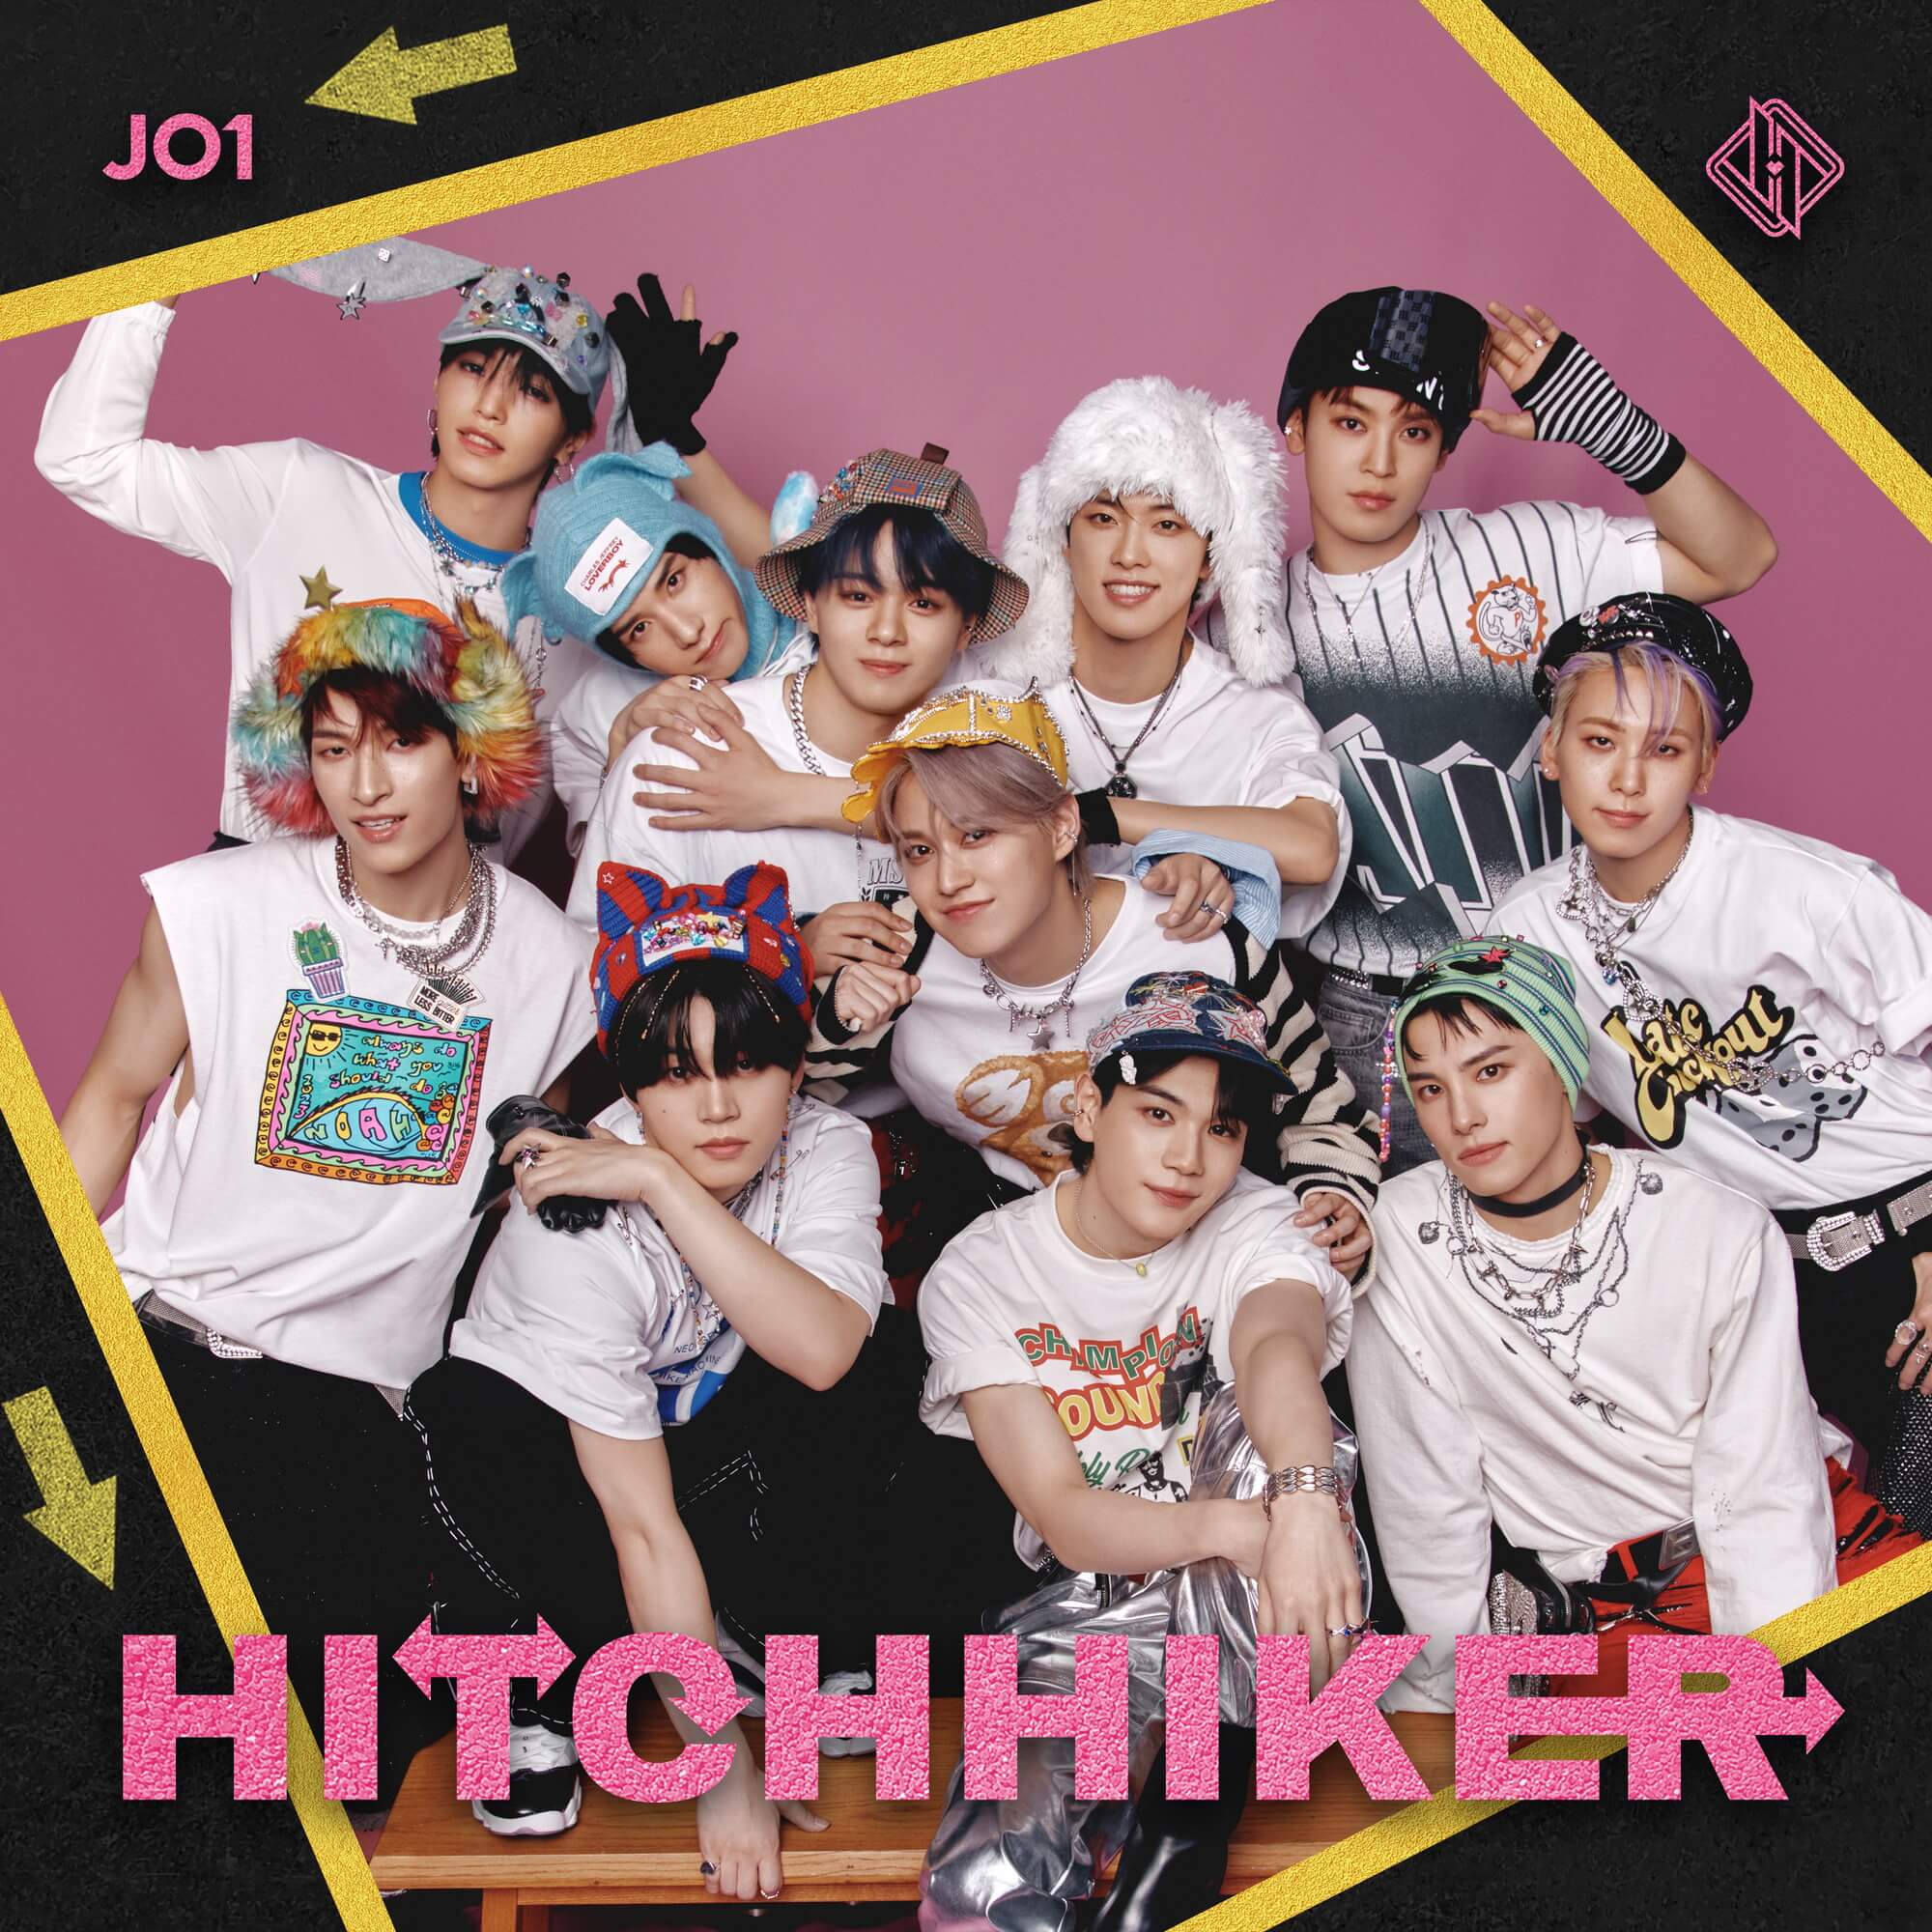 JO1 8TH SINGLE “HITCHHIKER ”｜JO1 Official Site